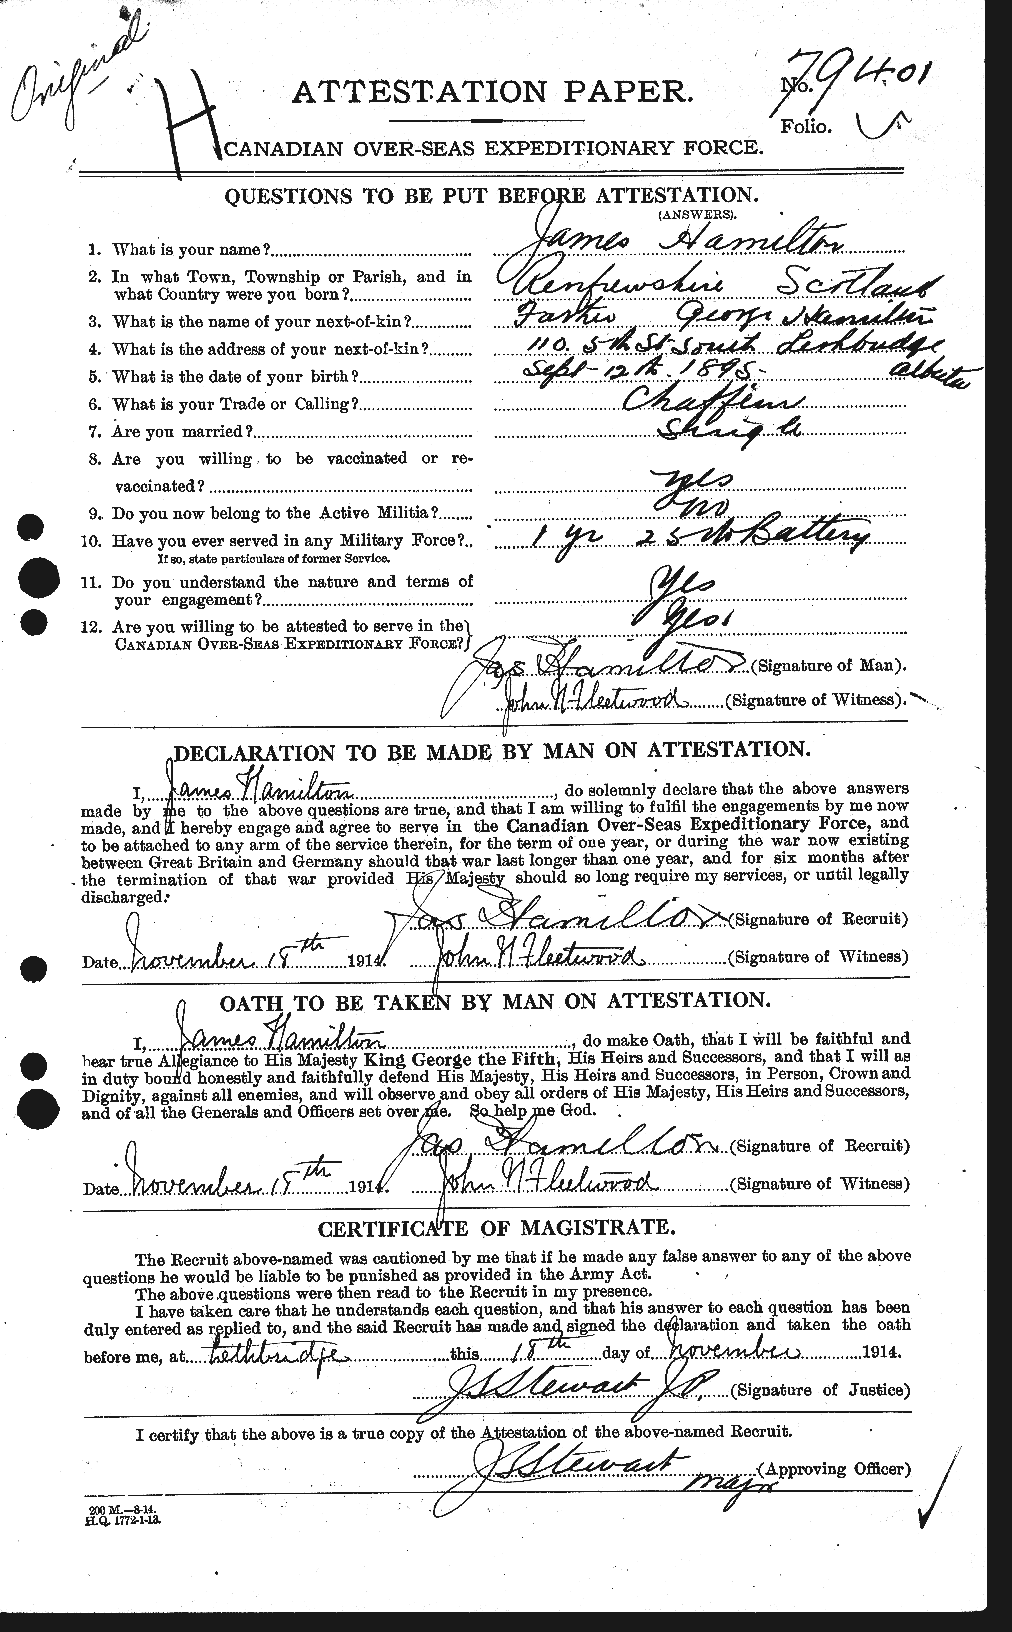 Personnel Records of the First World War - CEF 372960a